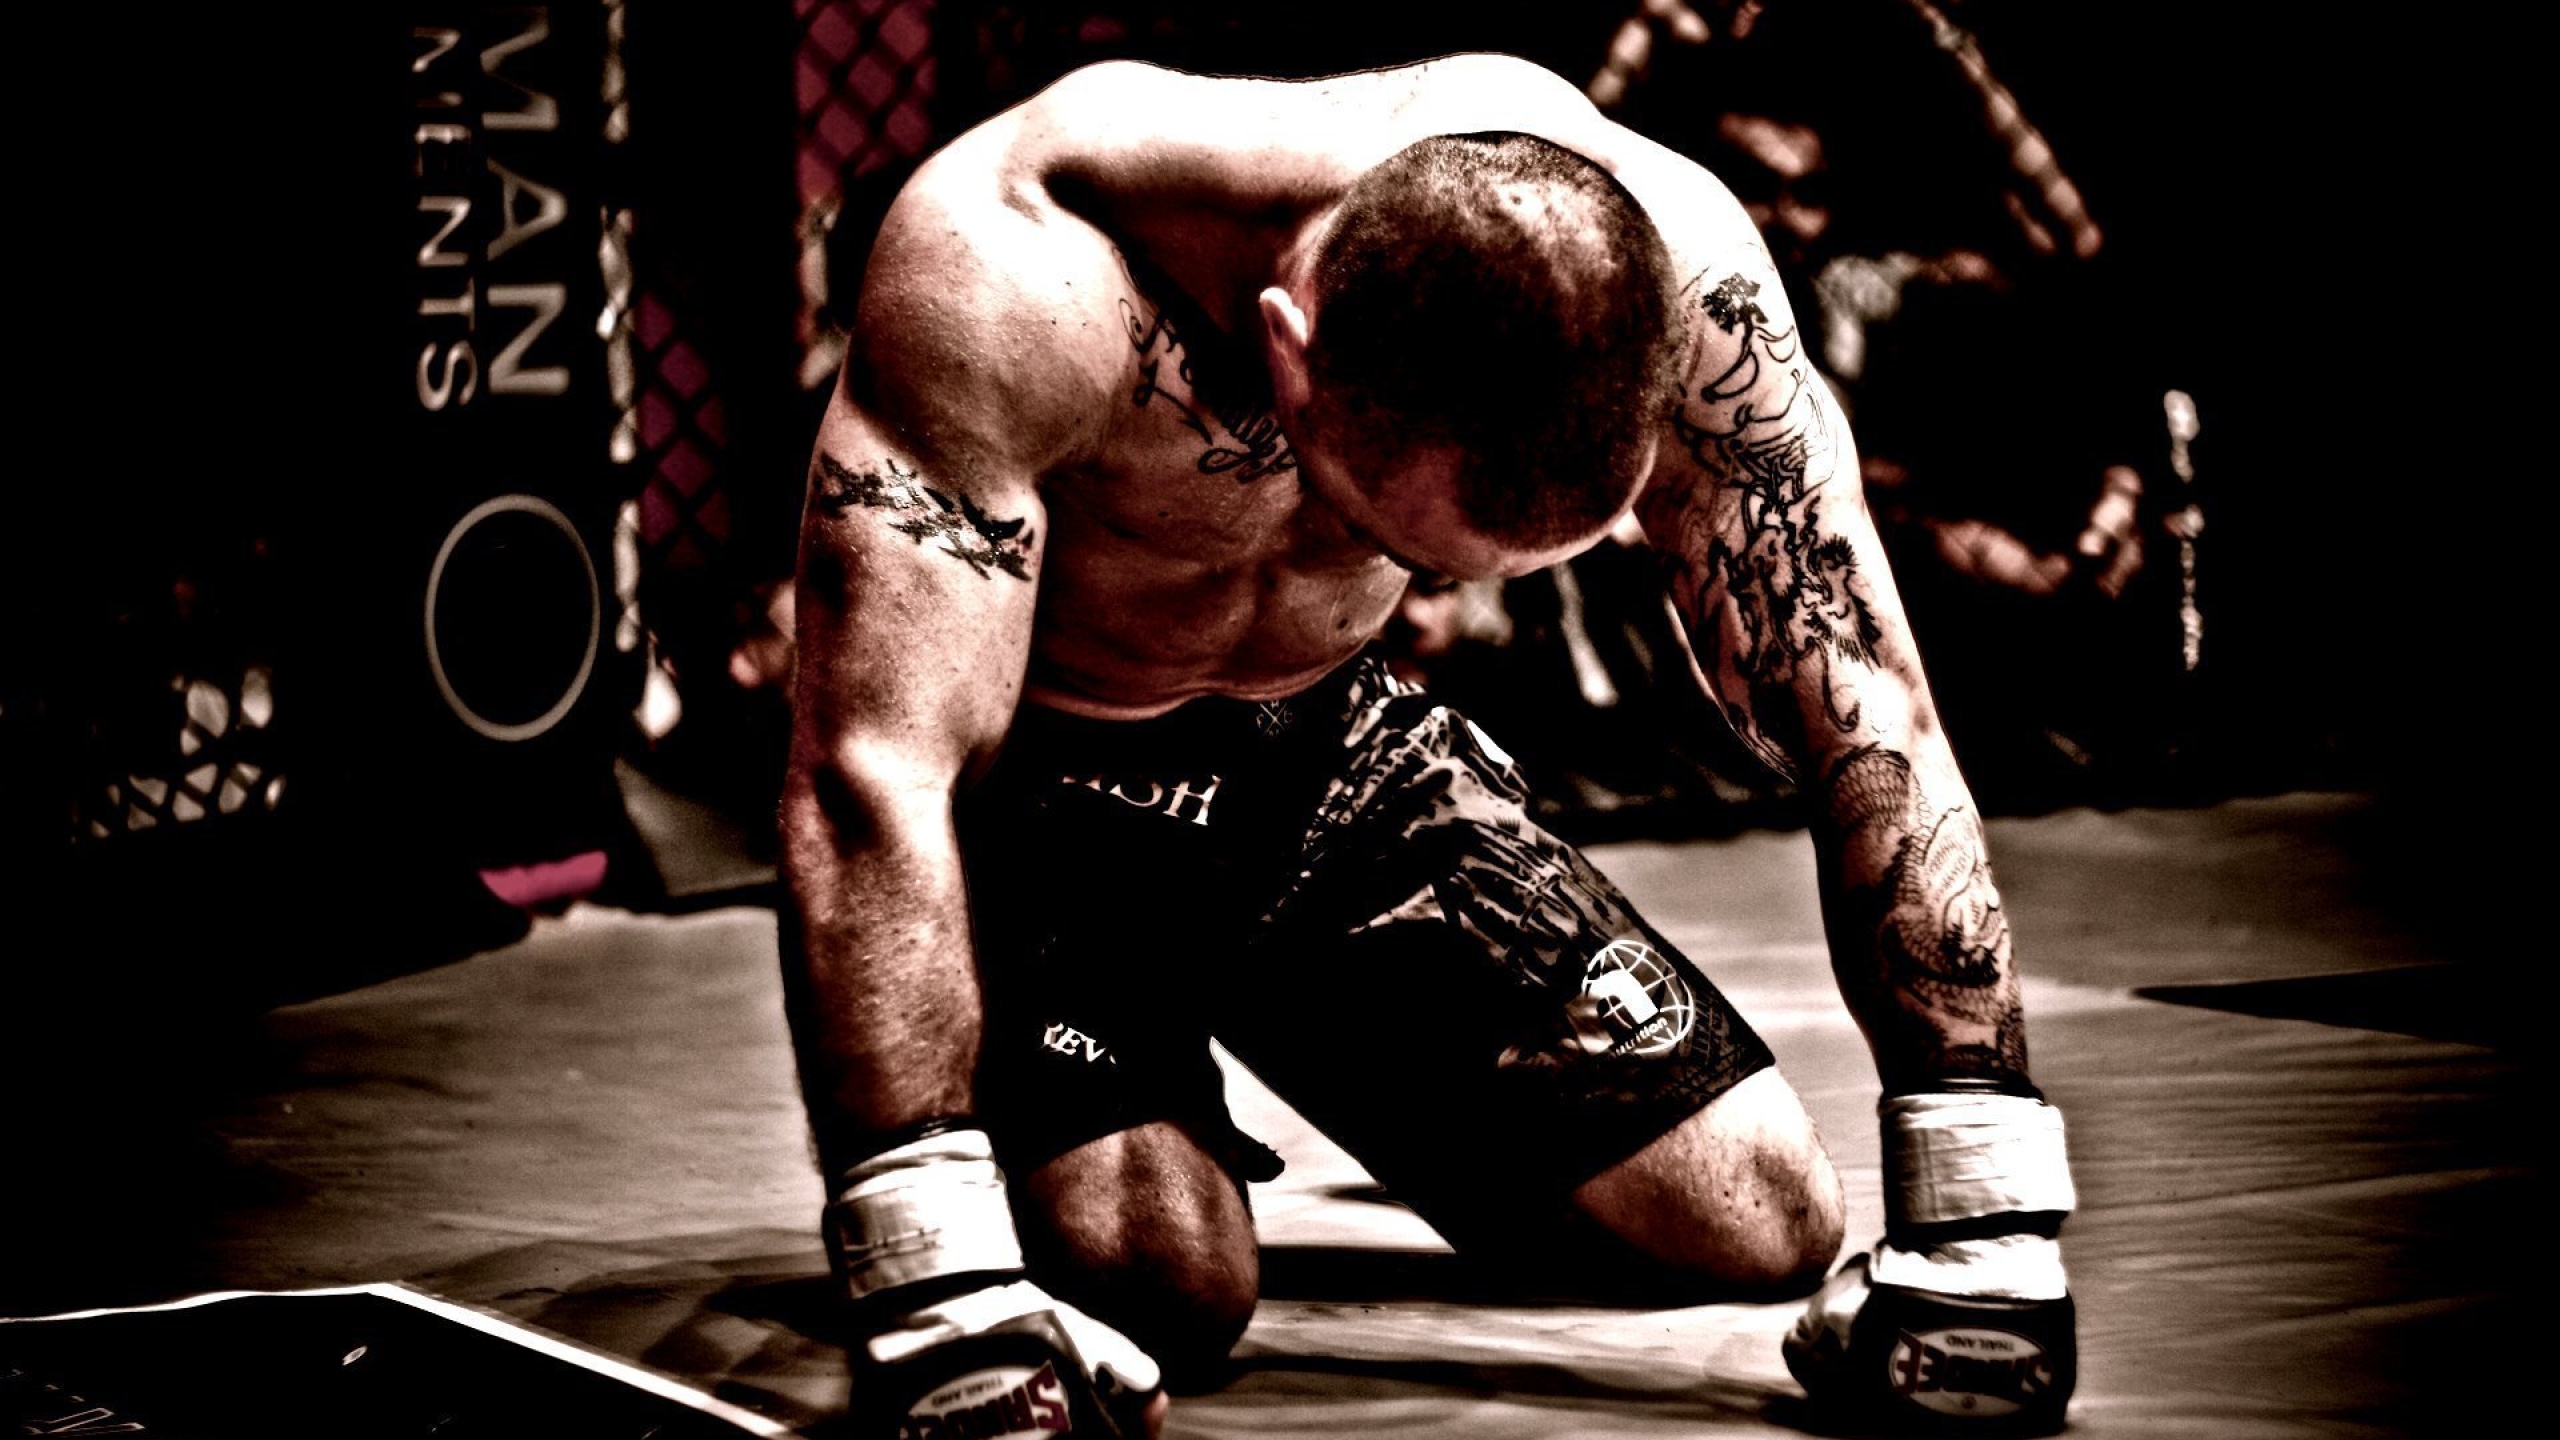 2560x1440 Resolution Mma Mixed Martial Arts Fighter 1440p Resolution